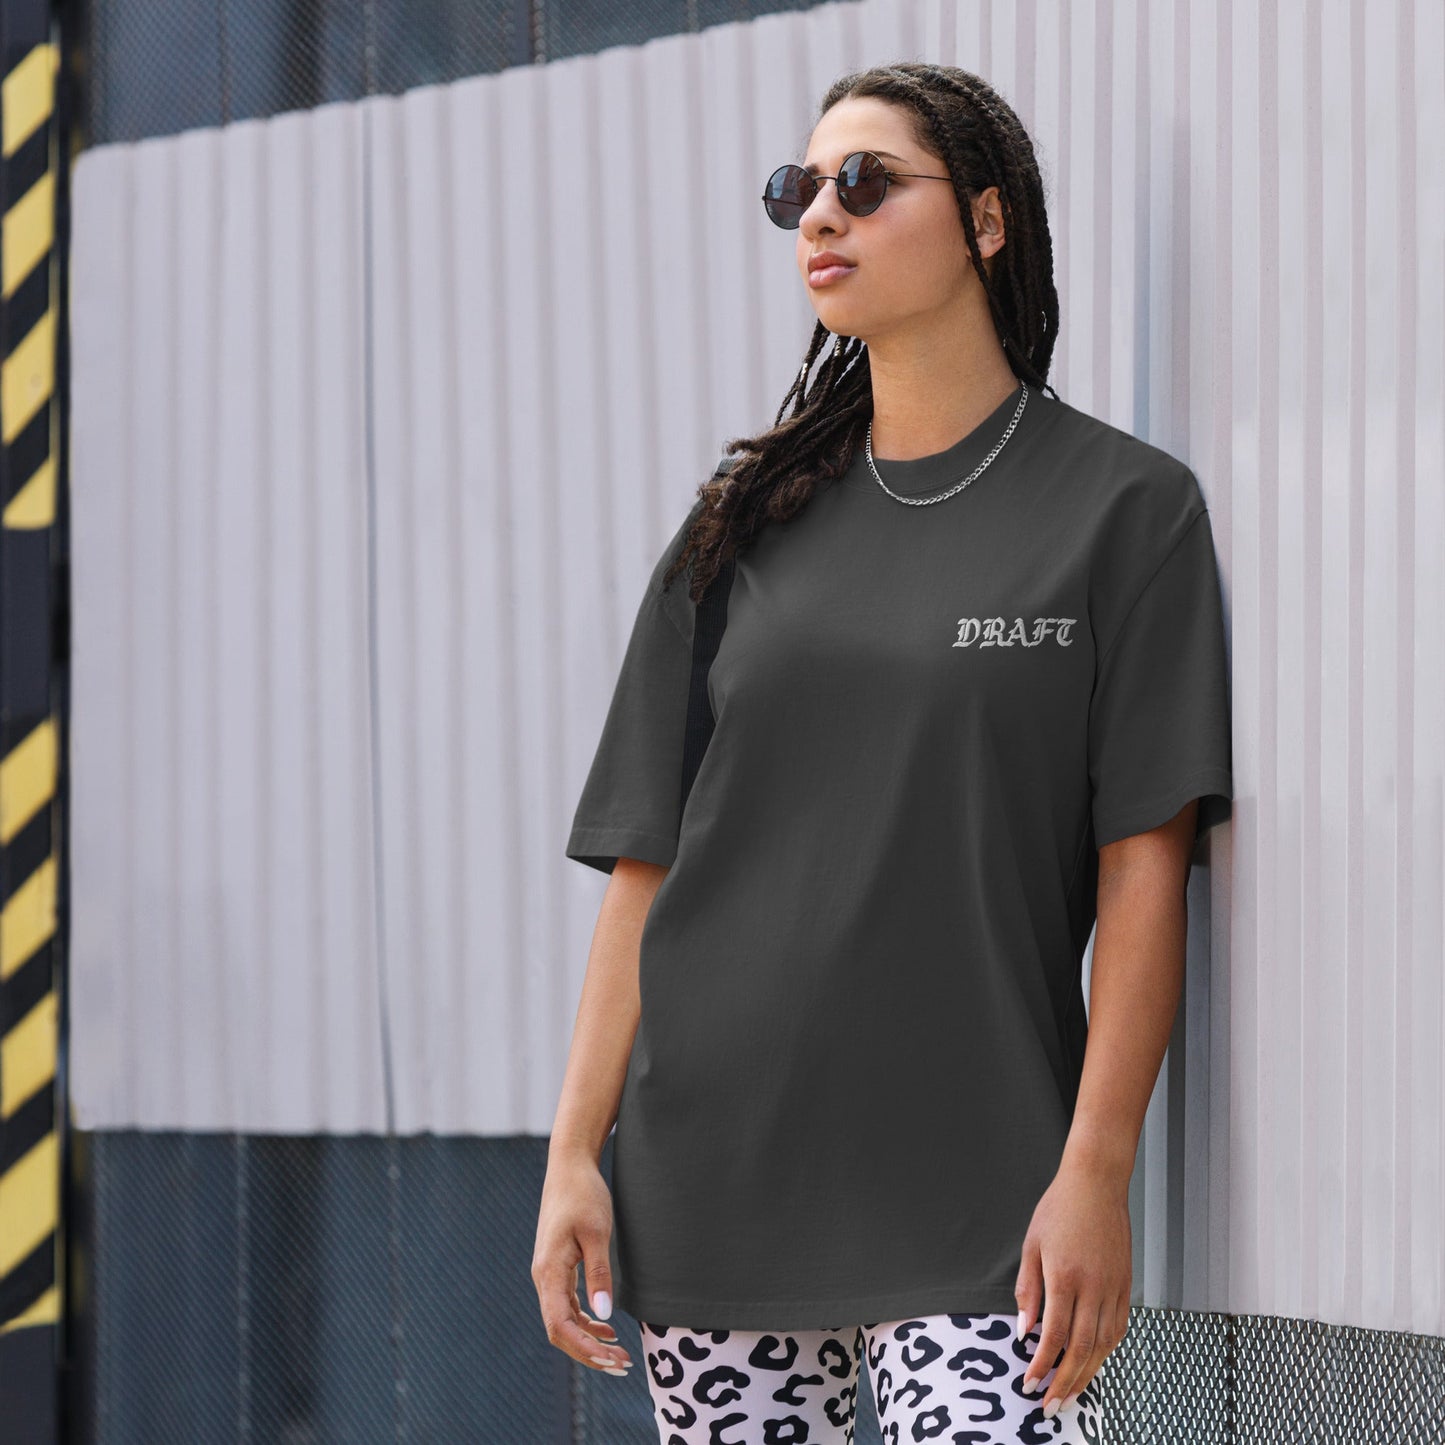 Draft Label Oversized Faded Embroidered T-shirt - BeExtra! Apparel & More